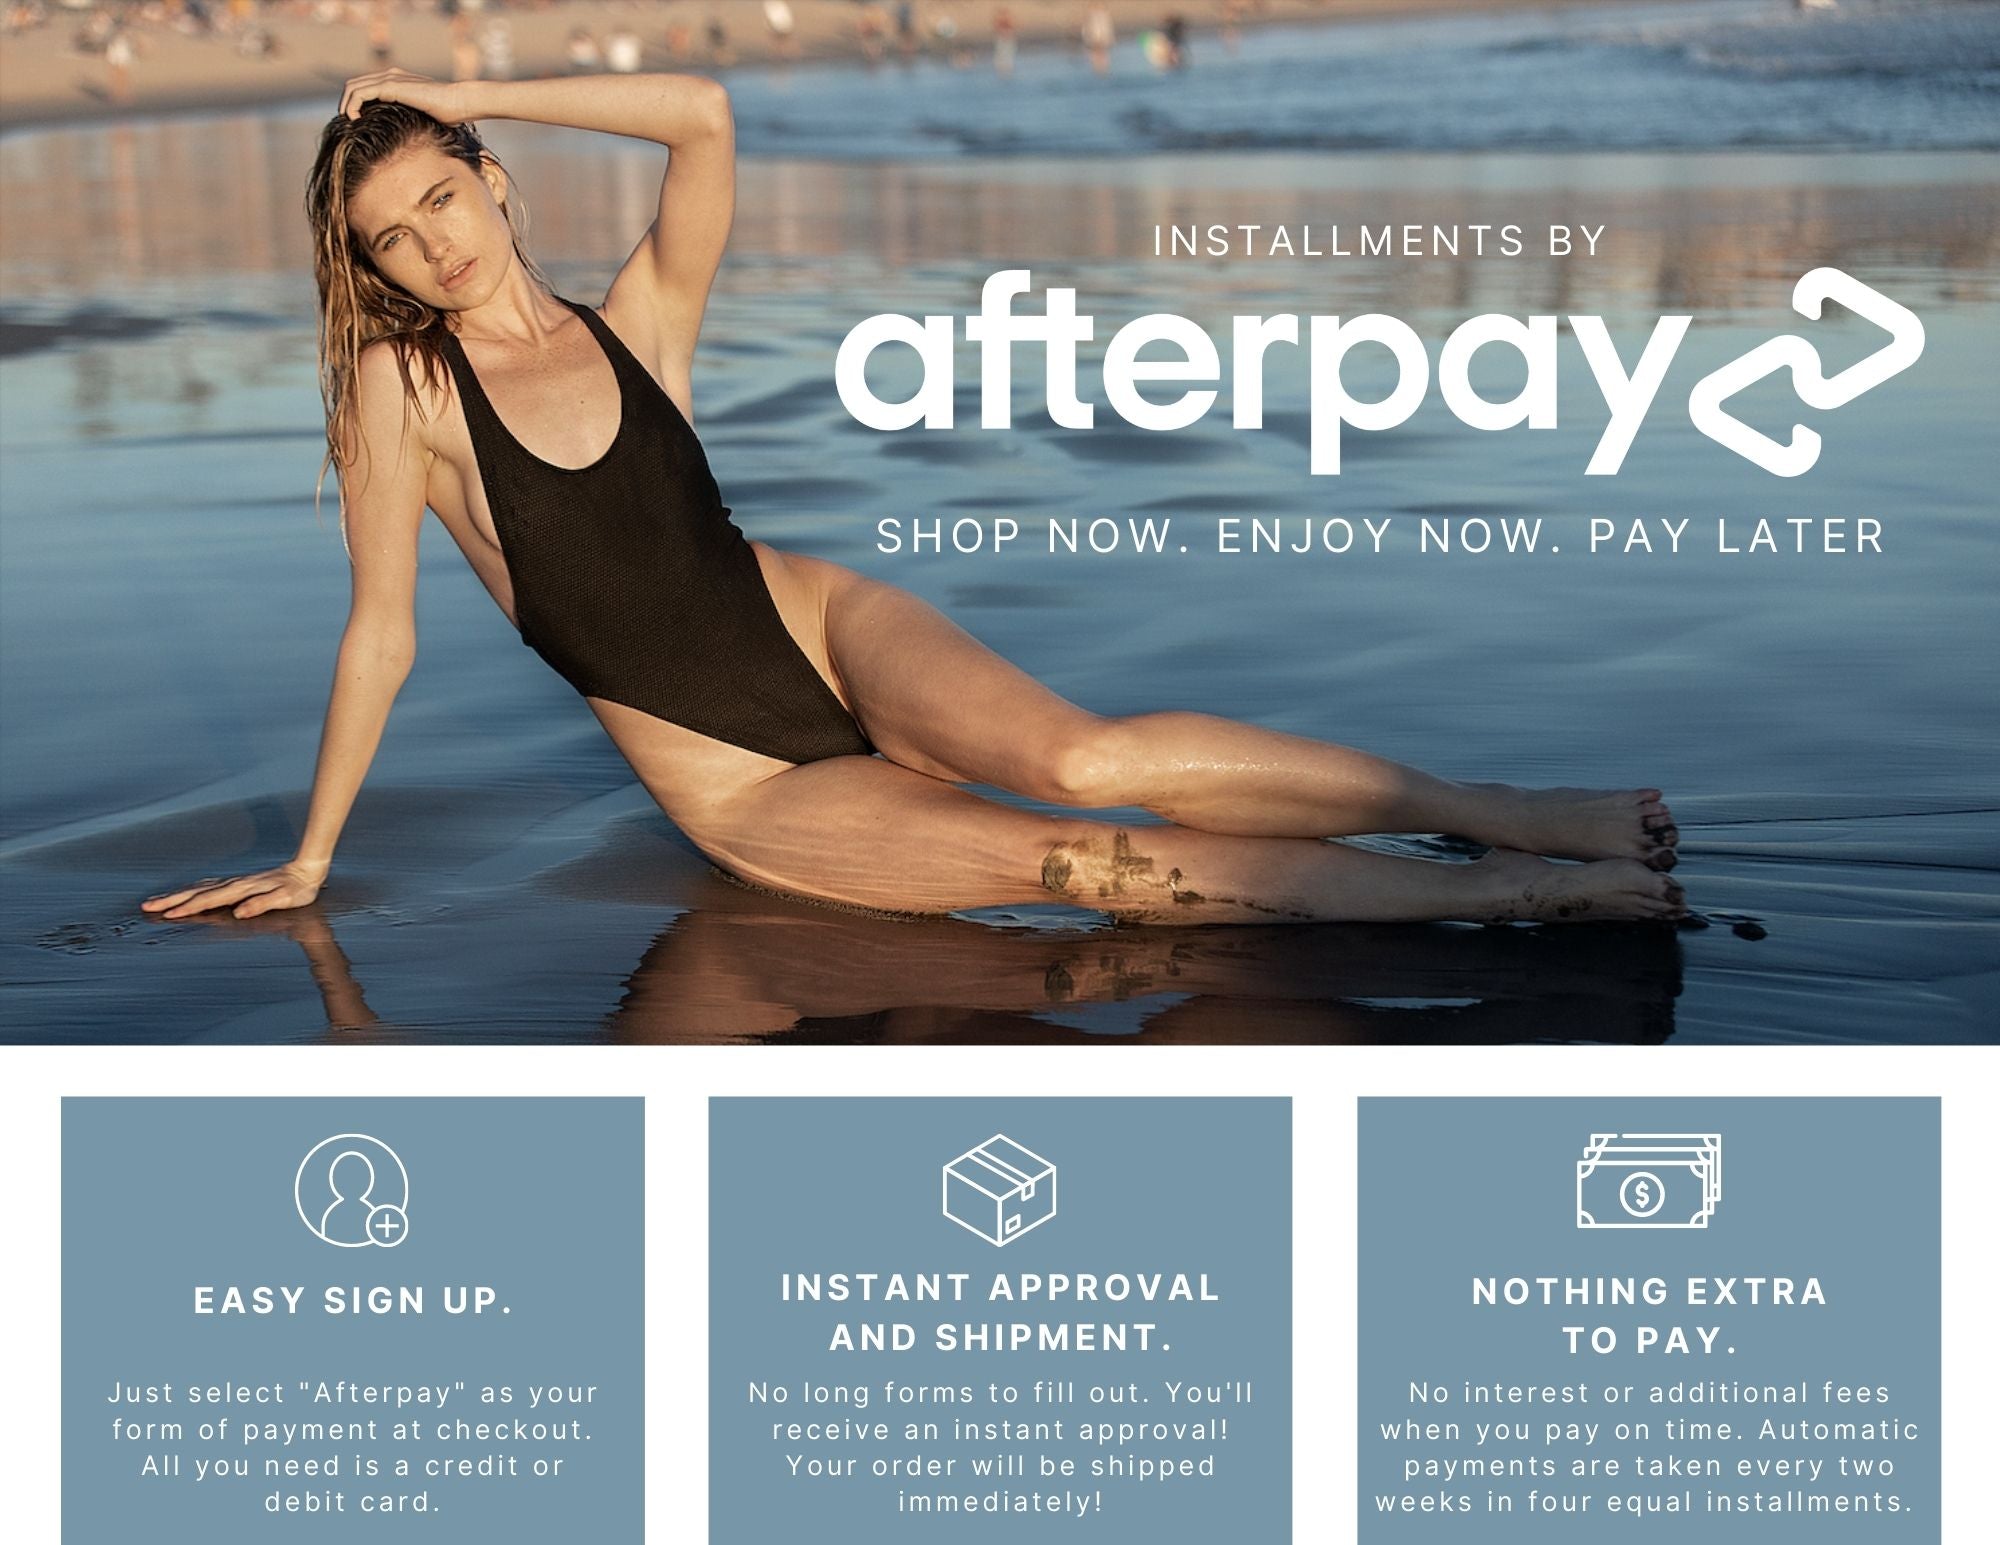 Afterpay, Shop Now. Enjoy Now. Pay Later.